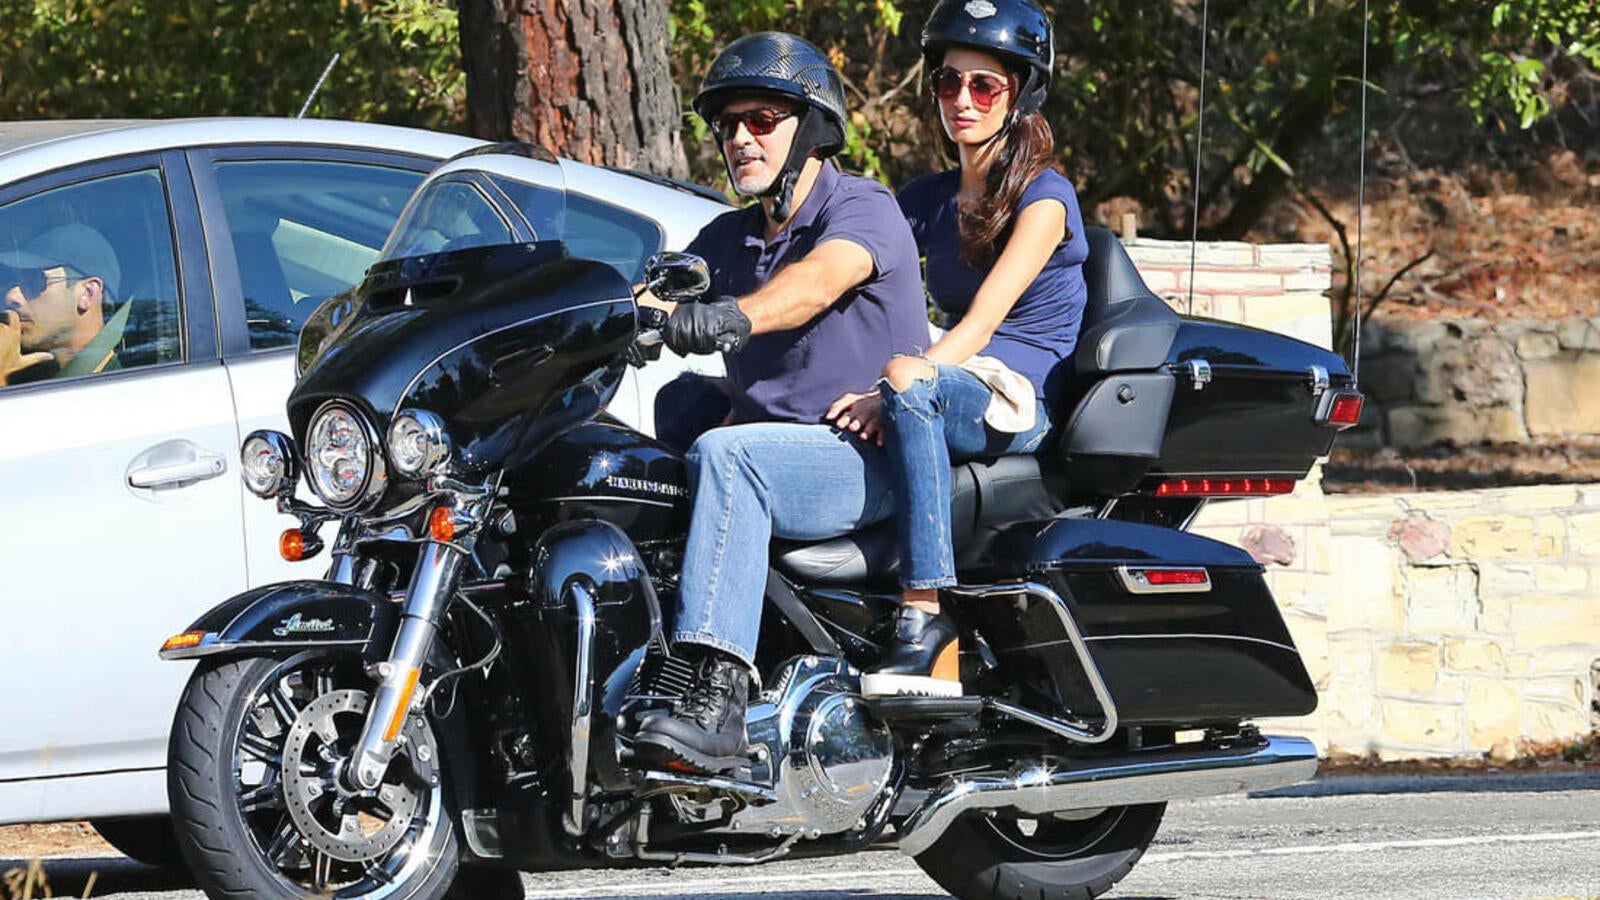 George Clooney shows off bad boy side on motorcycle ride with wife